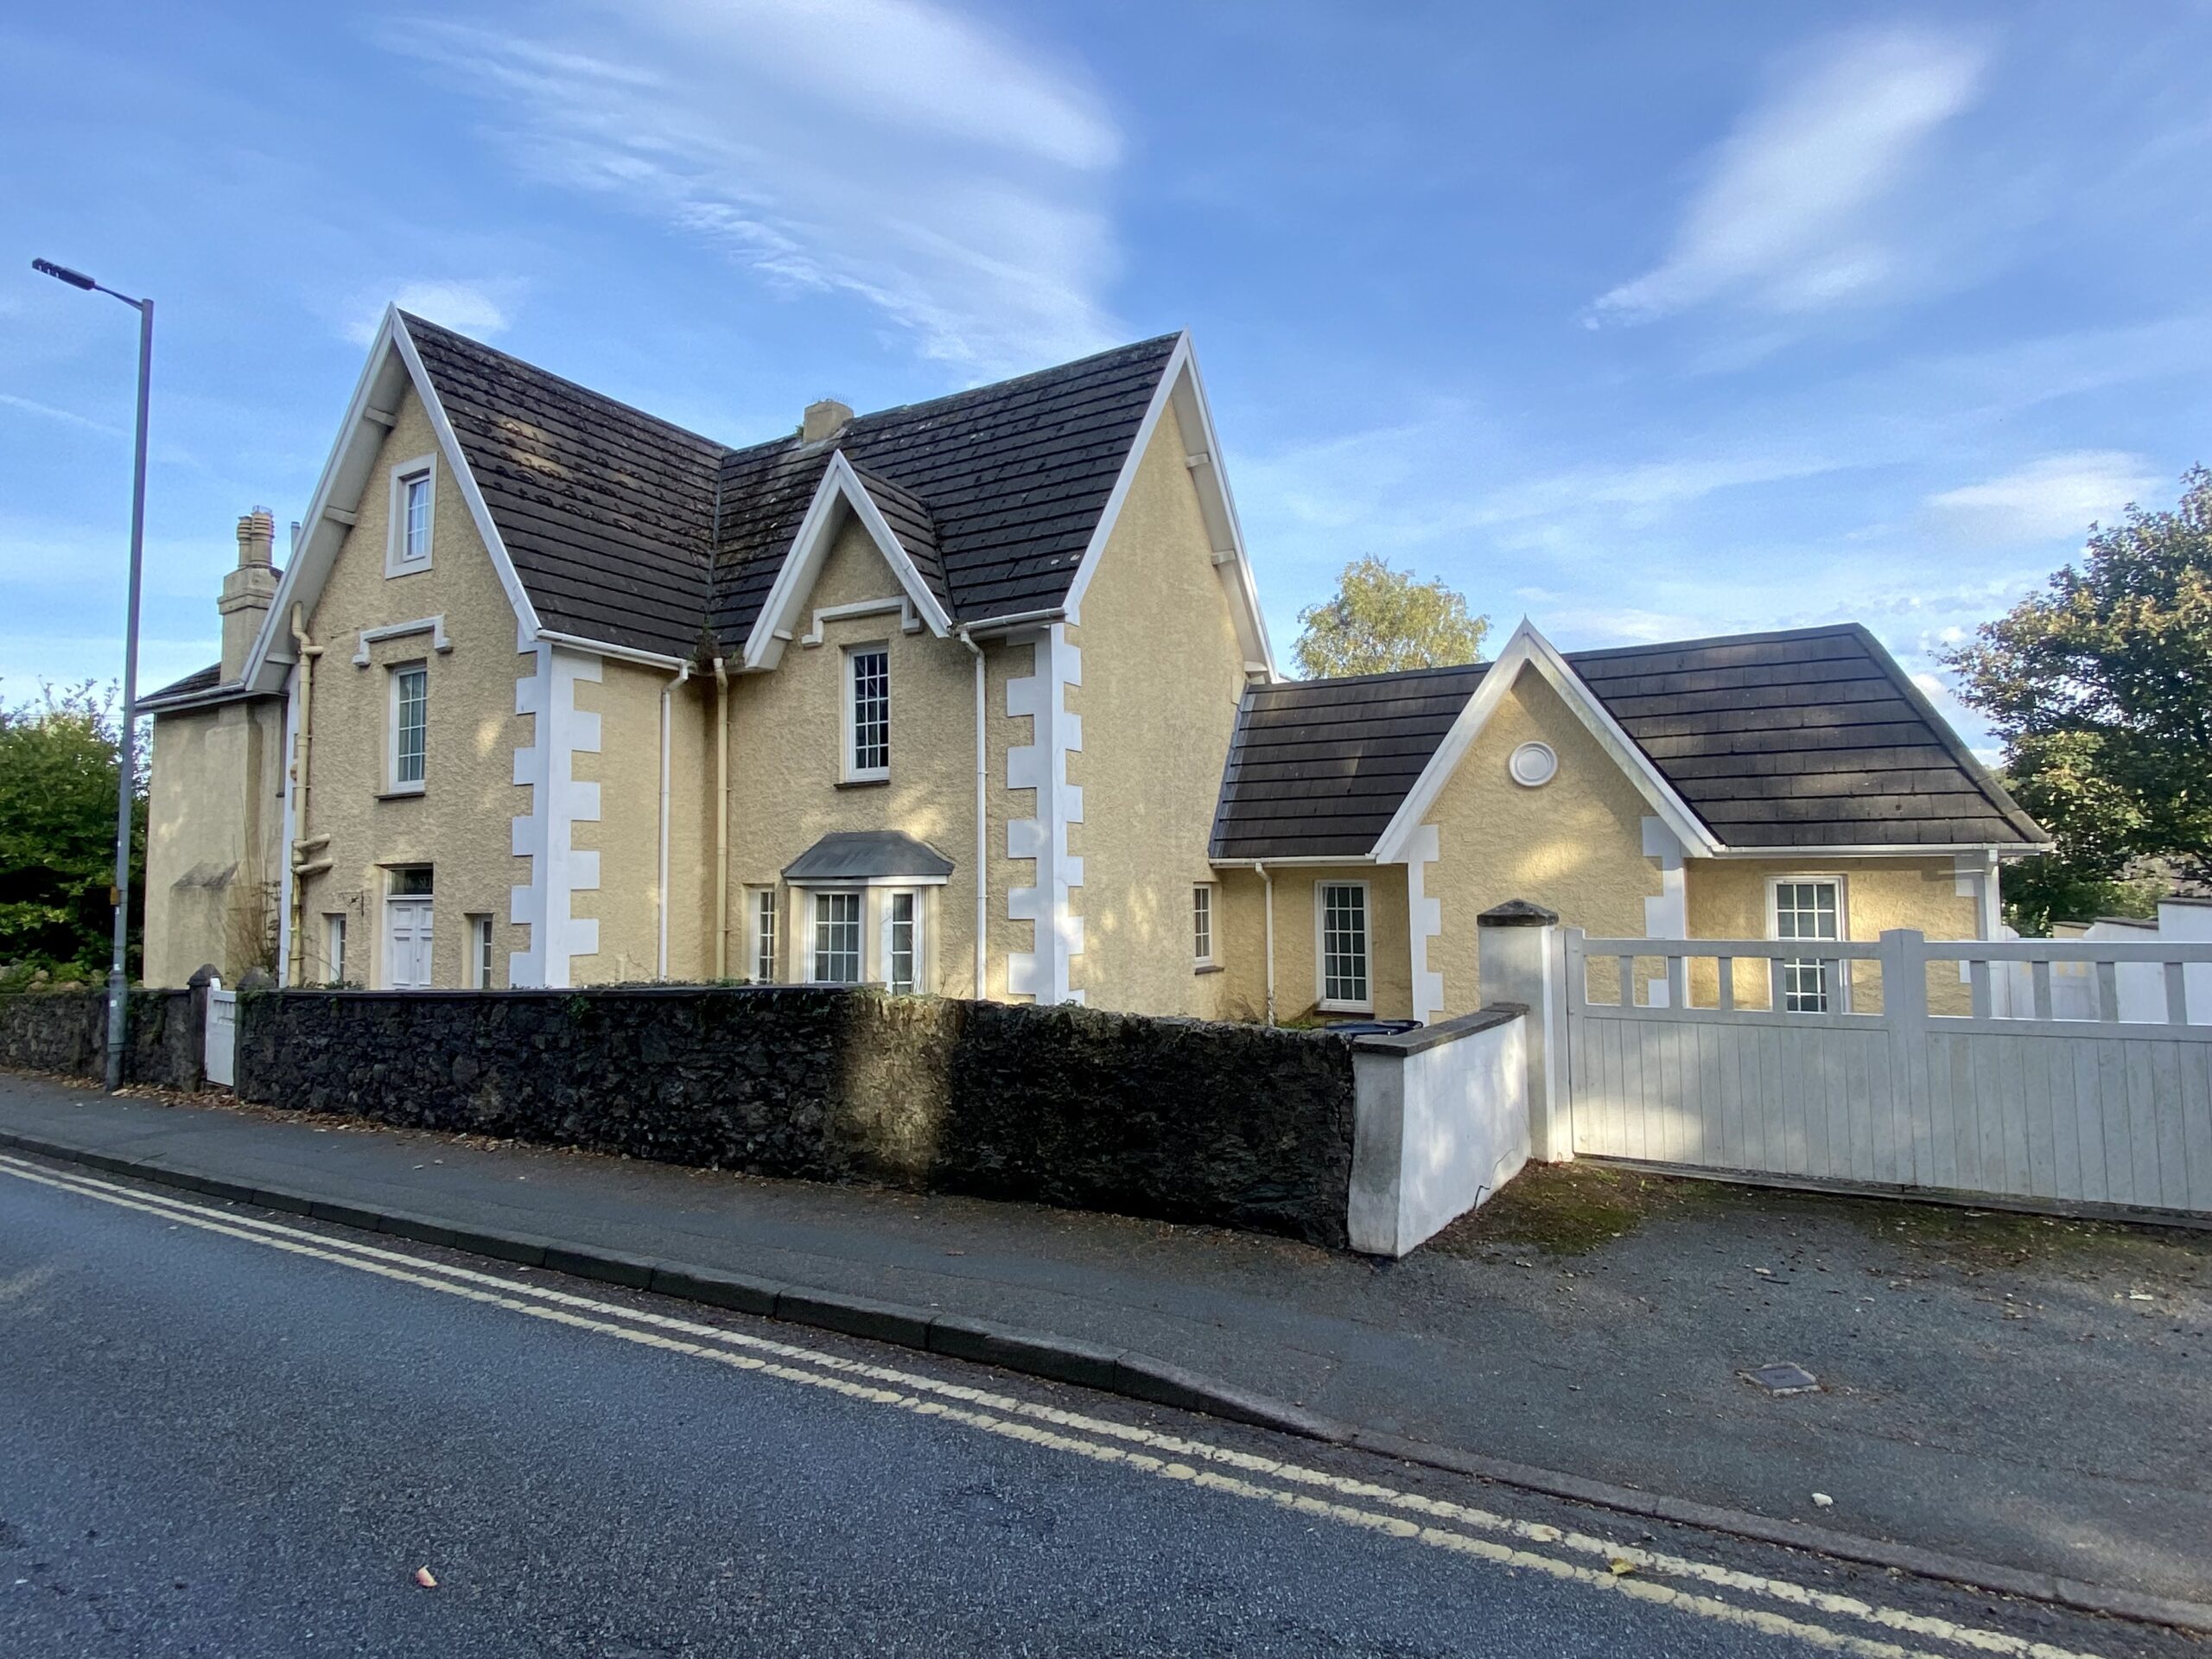 A Superb Modernised 6 Bedroom Victorian Gentlemans Residence Within Menai Bridge is Listed for the October Auction